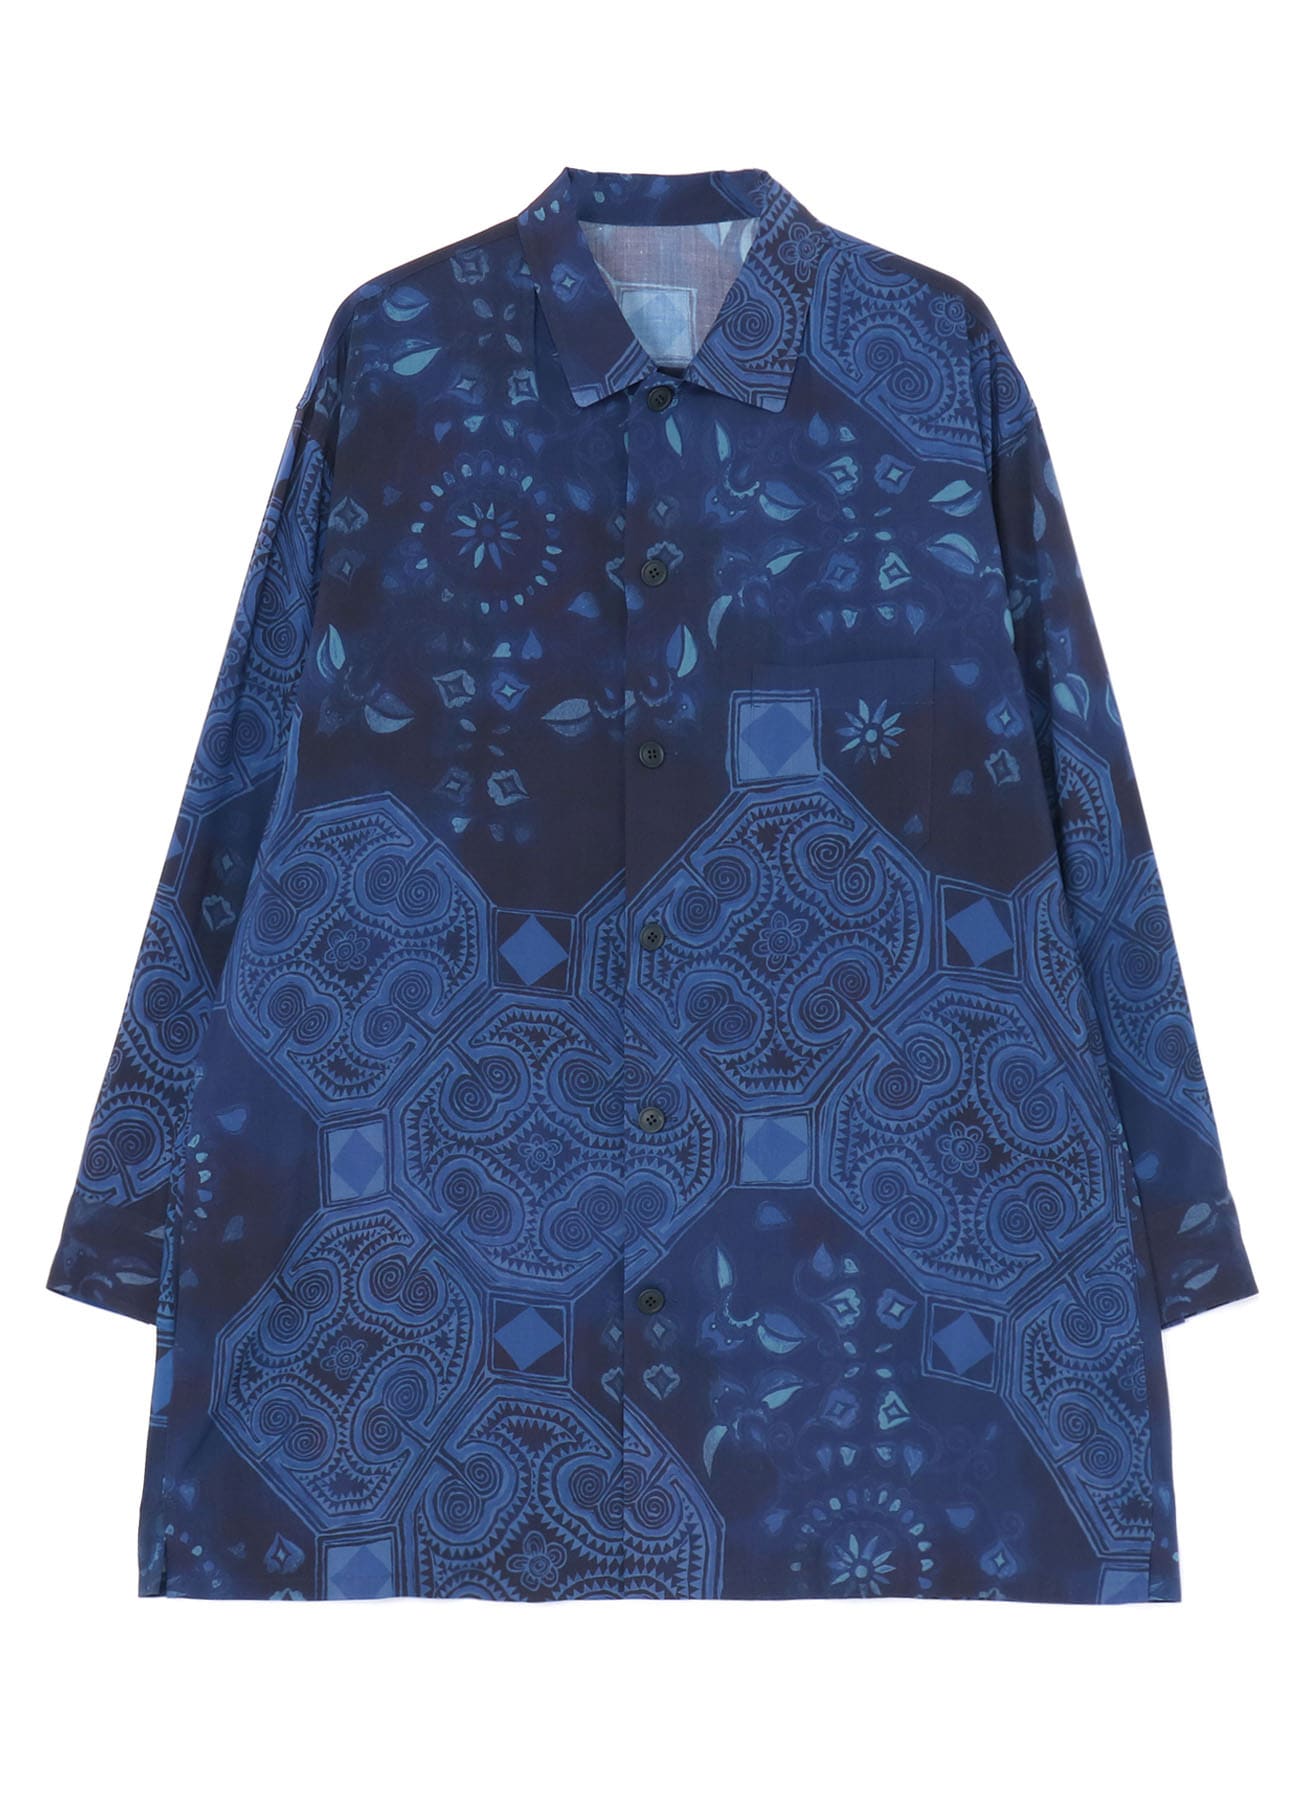 CHINOISERIE-A PRINTED OPEN COLLAR SHIRT